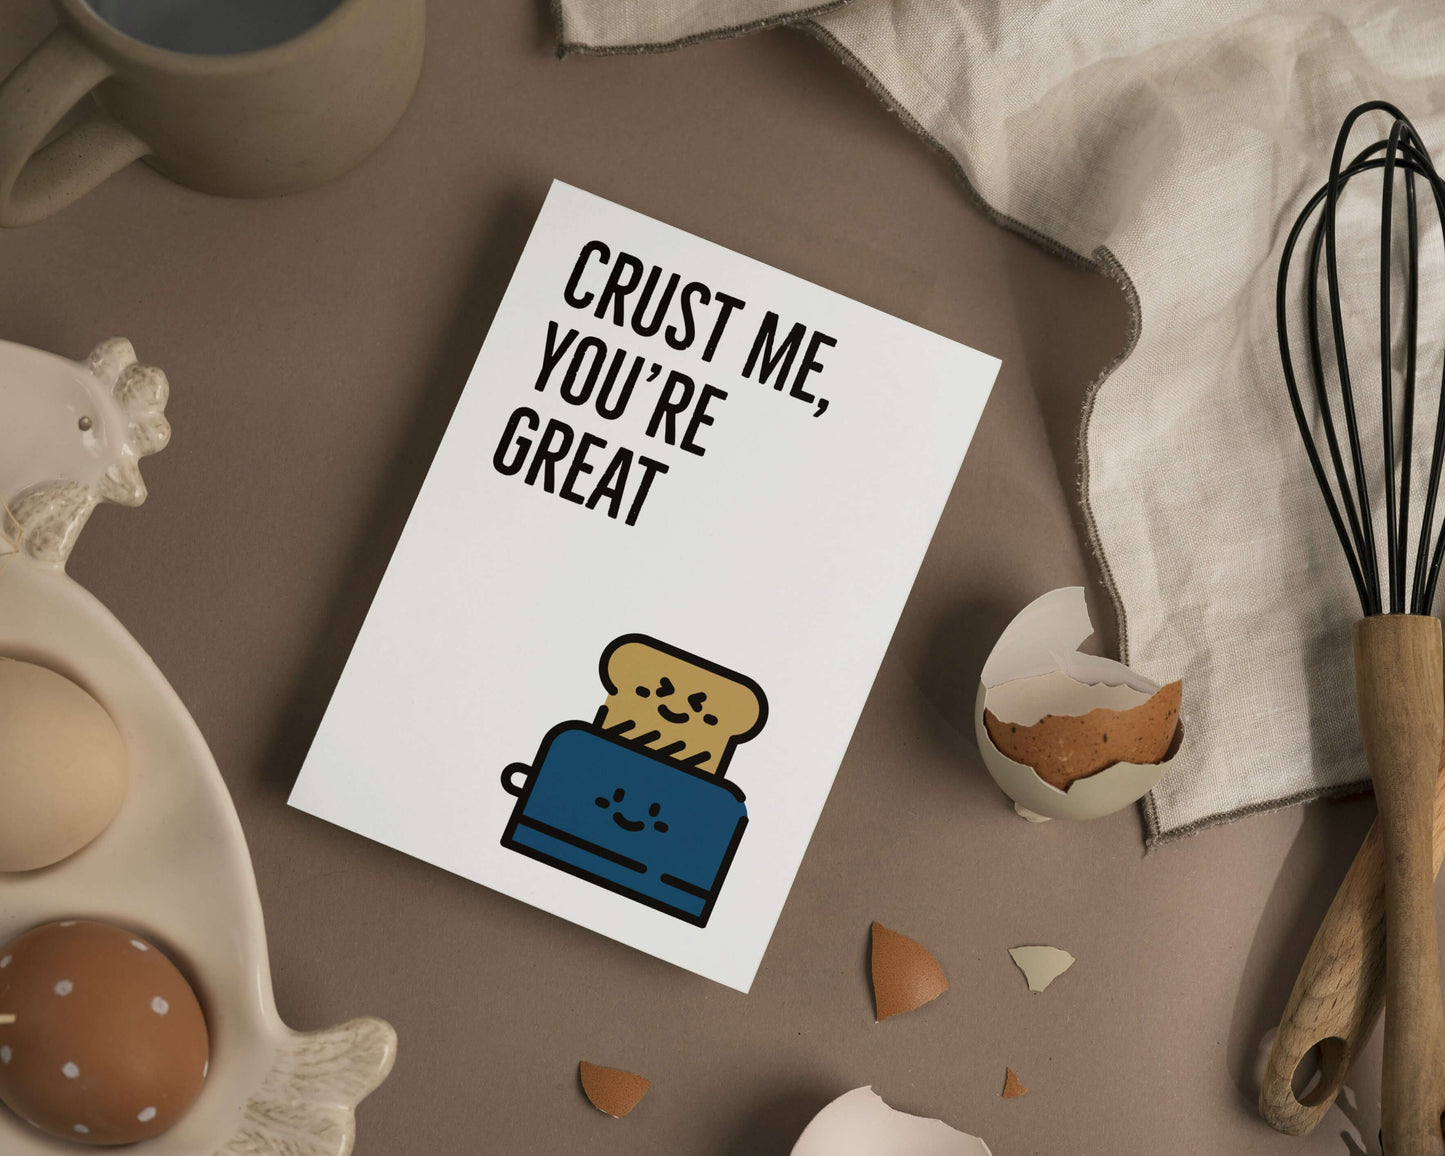 The Card Store UK's Crust Me, You're Great | Funny Bread Pun Everyday Card | Blank Bread Pun Baker Funny General Greeting Card, General Cards for £3.50 each